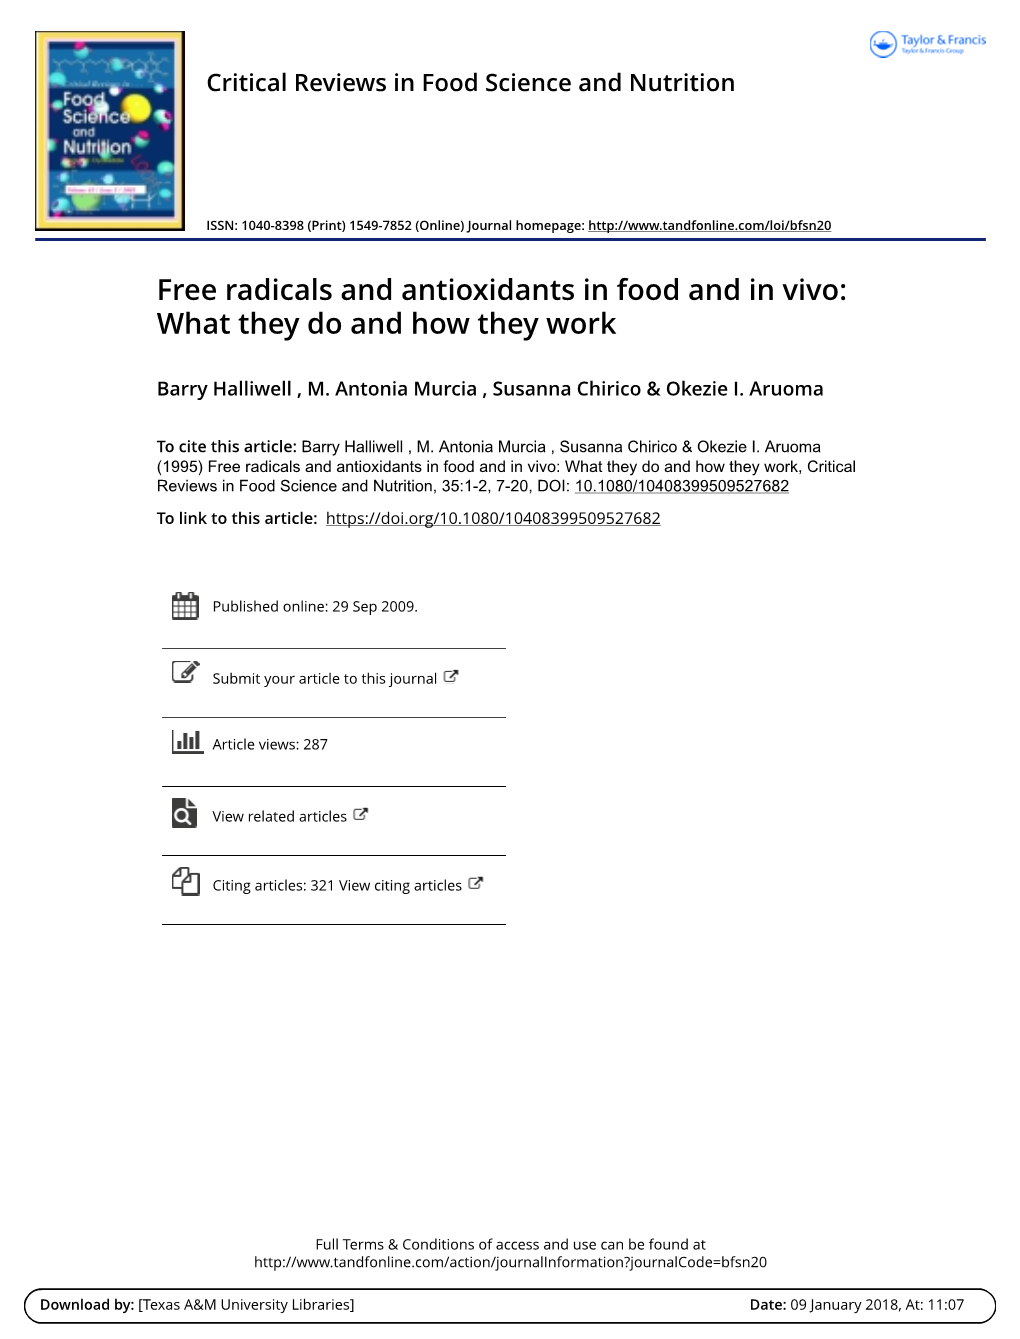 Free Radicals and Antioxidants in Food and in Vivo: What They Do and How They Work